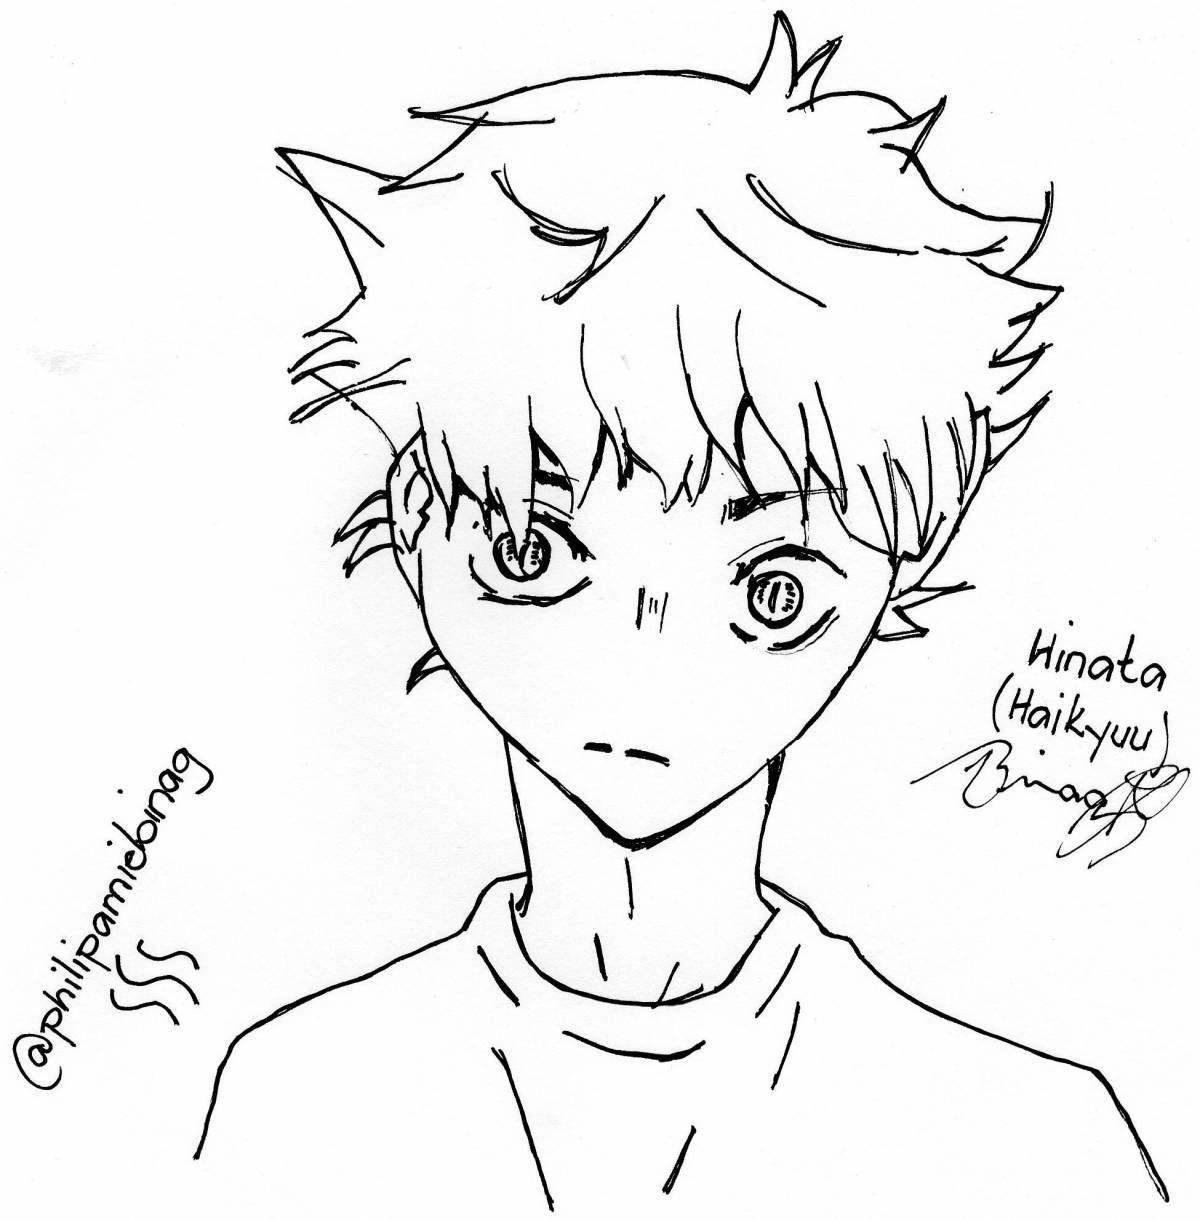 Hinata's exquisite shoes coloring page